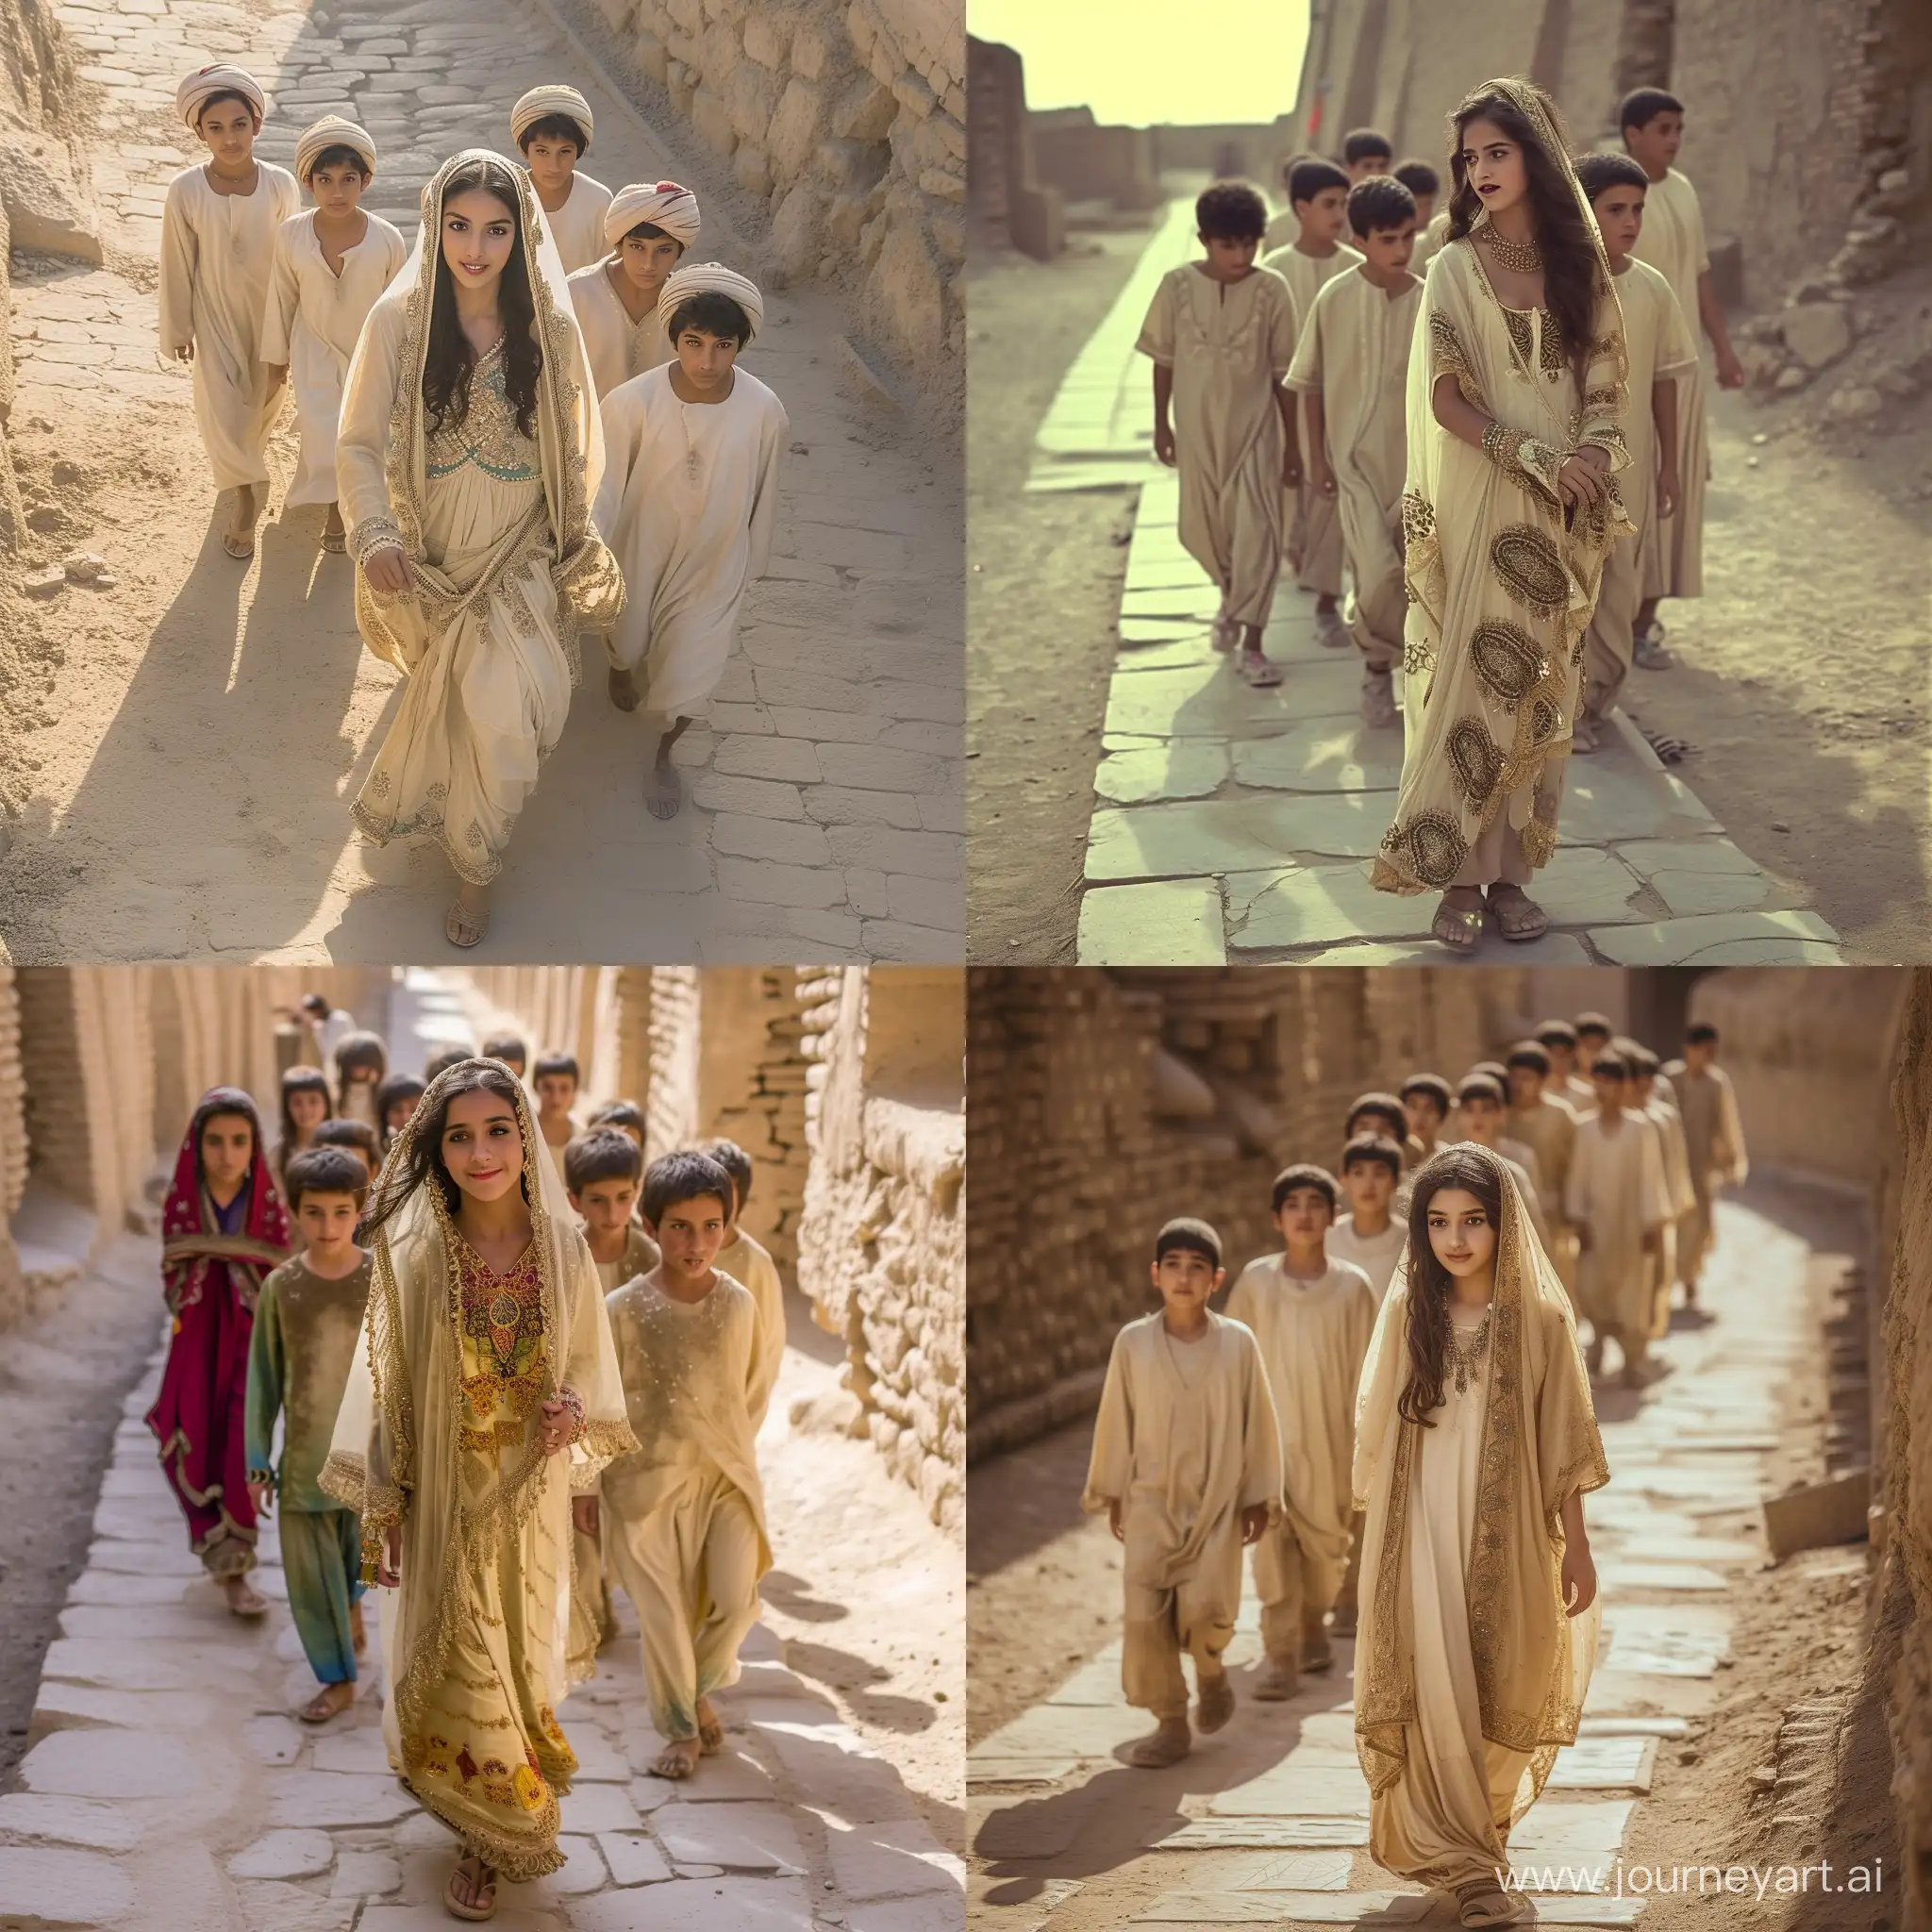 A beautiful Persian princess with seven brothers, 20 to 30 years old, are walking on the ancient sidewalks of Bam Citadel.